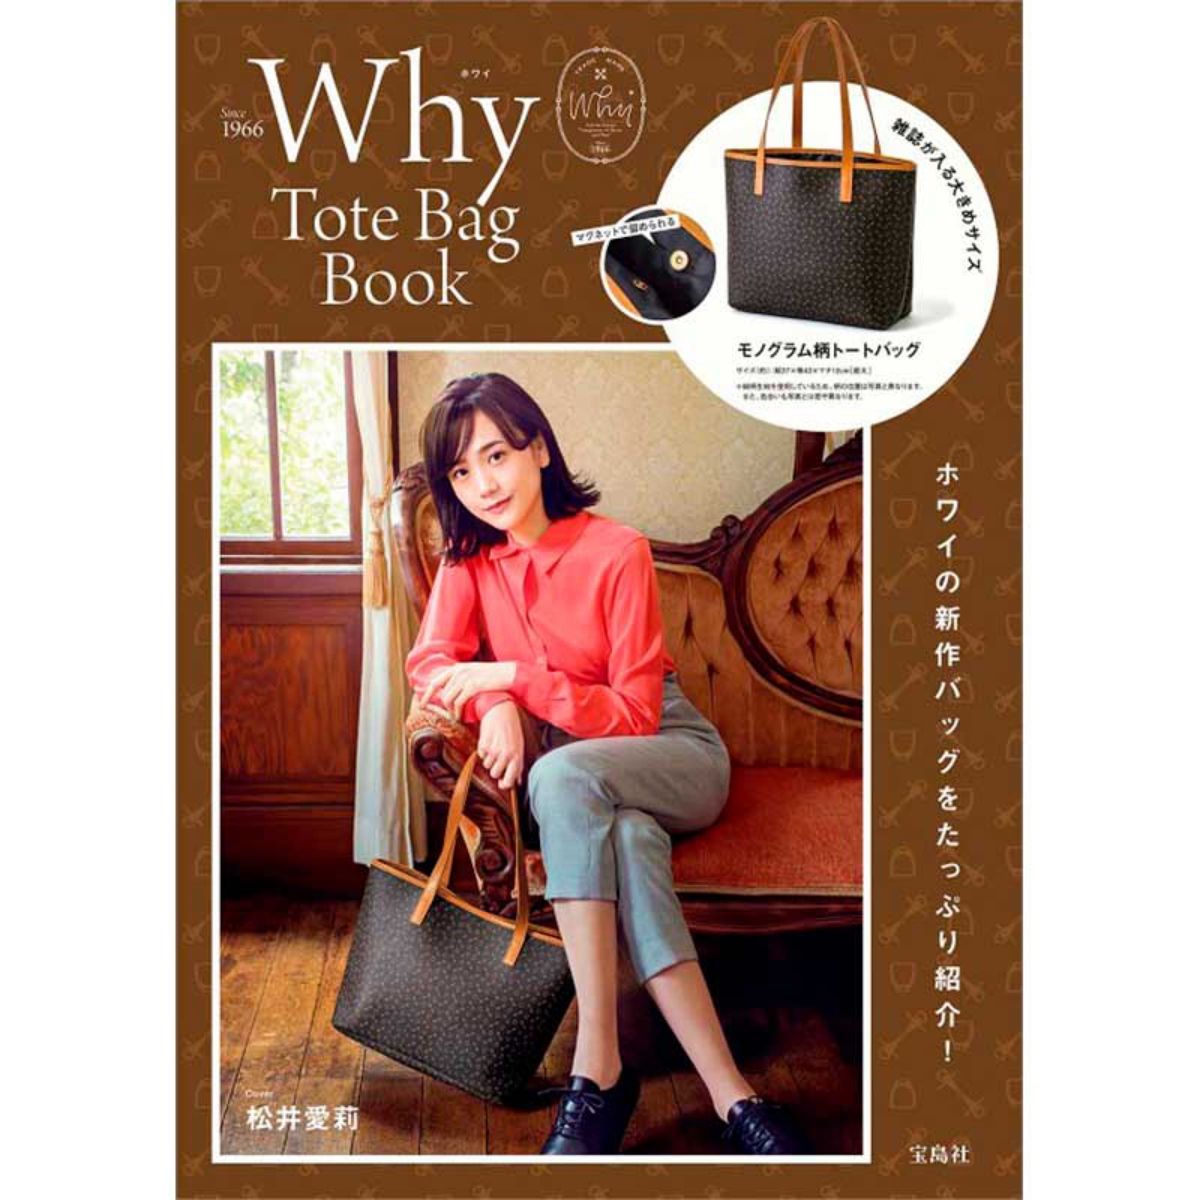 Why Tote Bag Book モノグラム柄トートバッグ ホワイ 雑誌付録